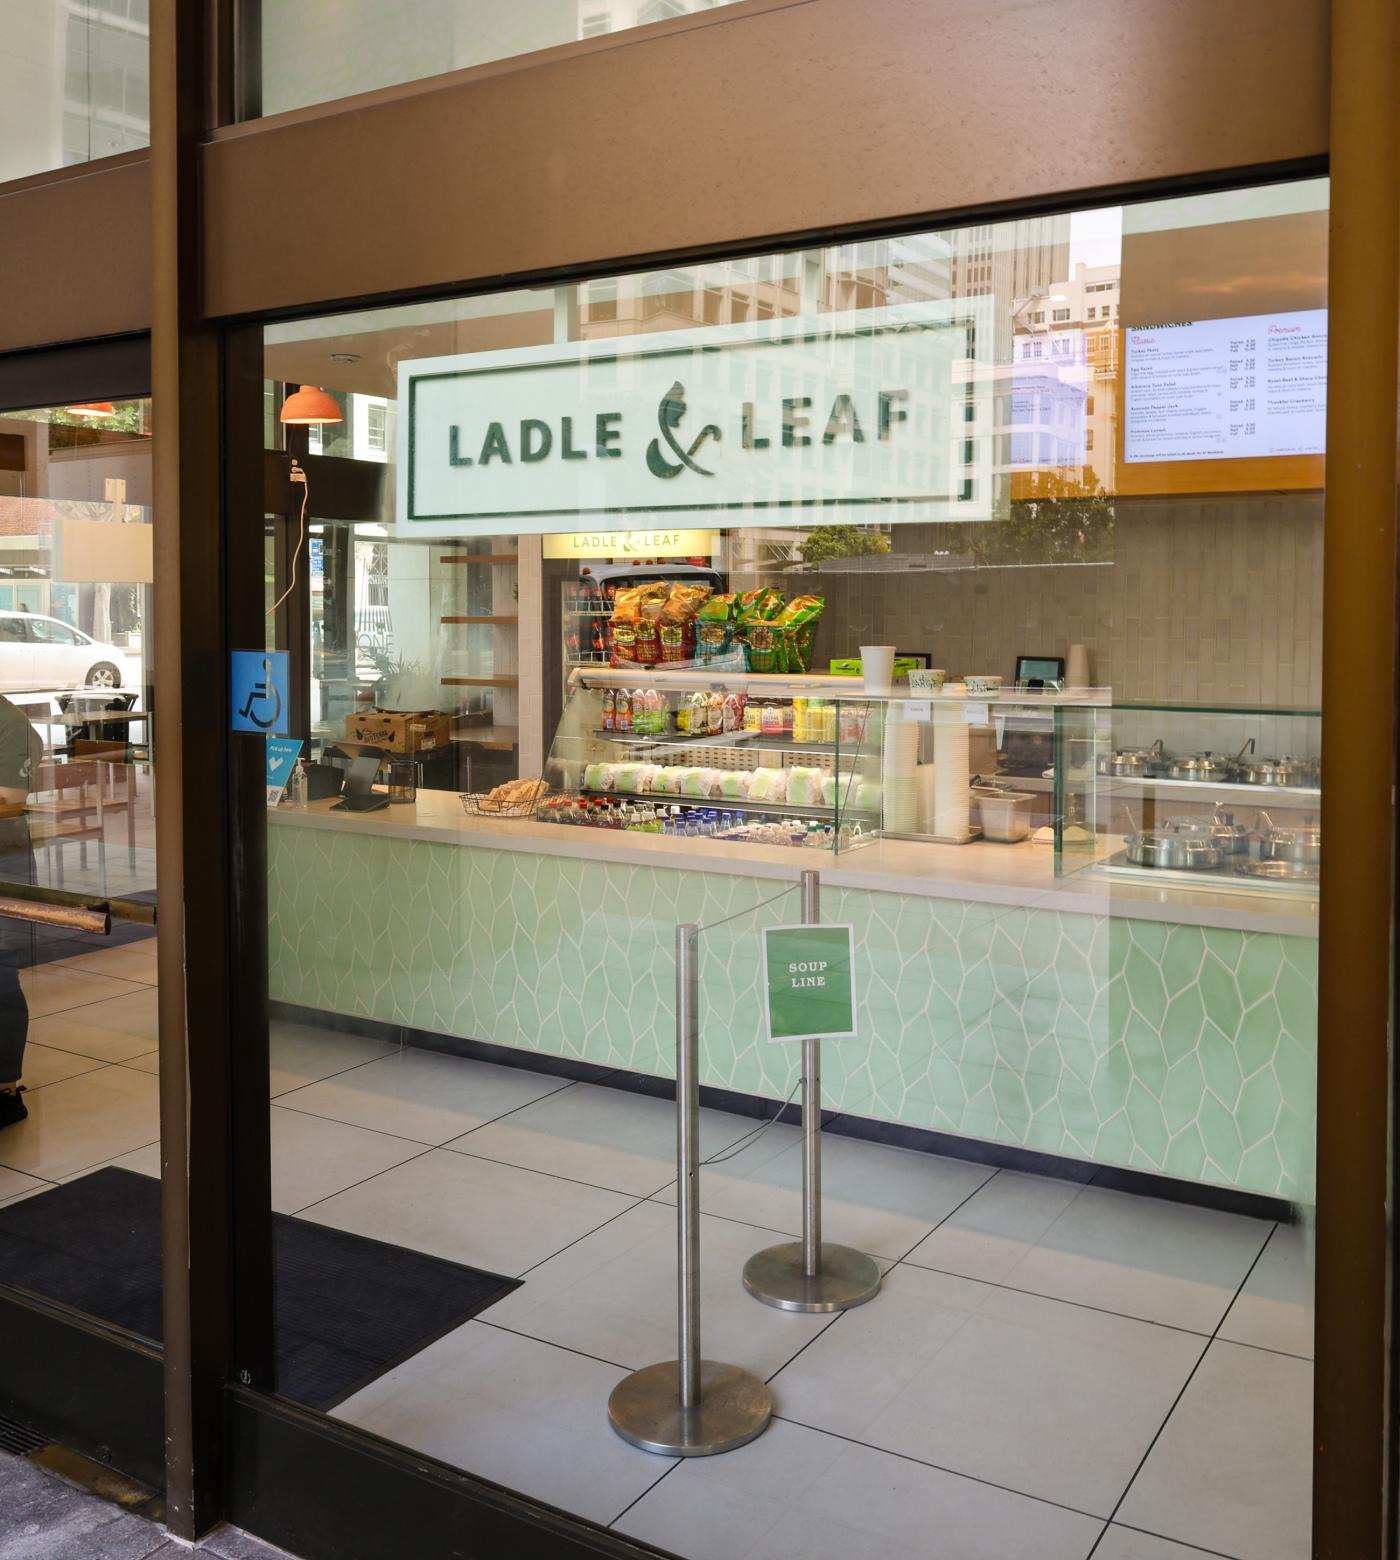 A view inside Ladle & Leaf in downtown San Francisco.